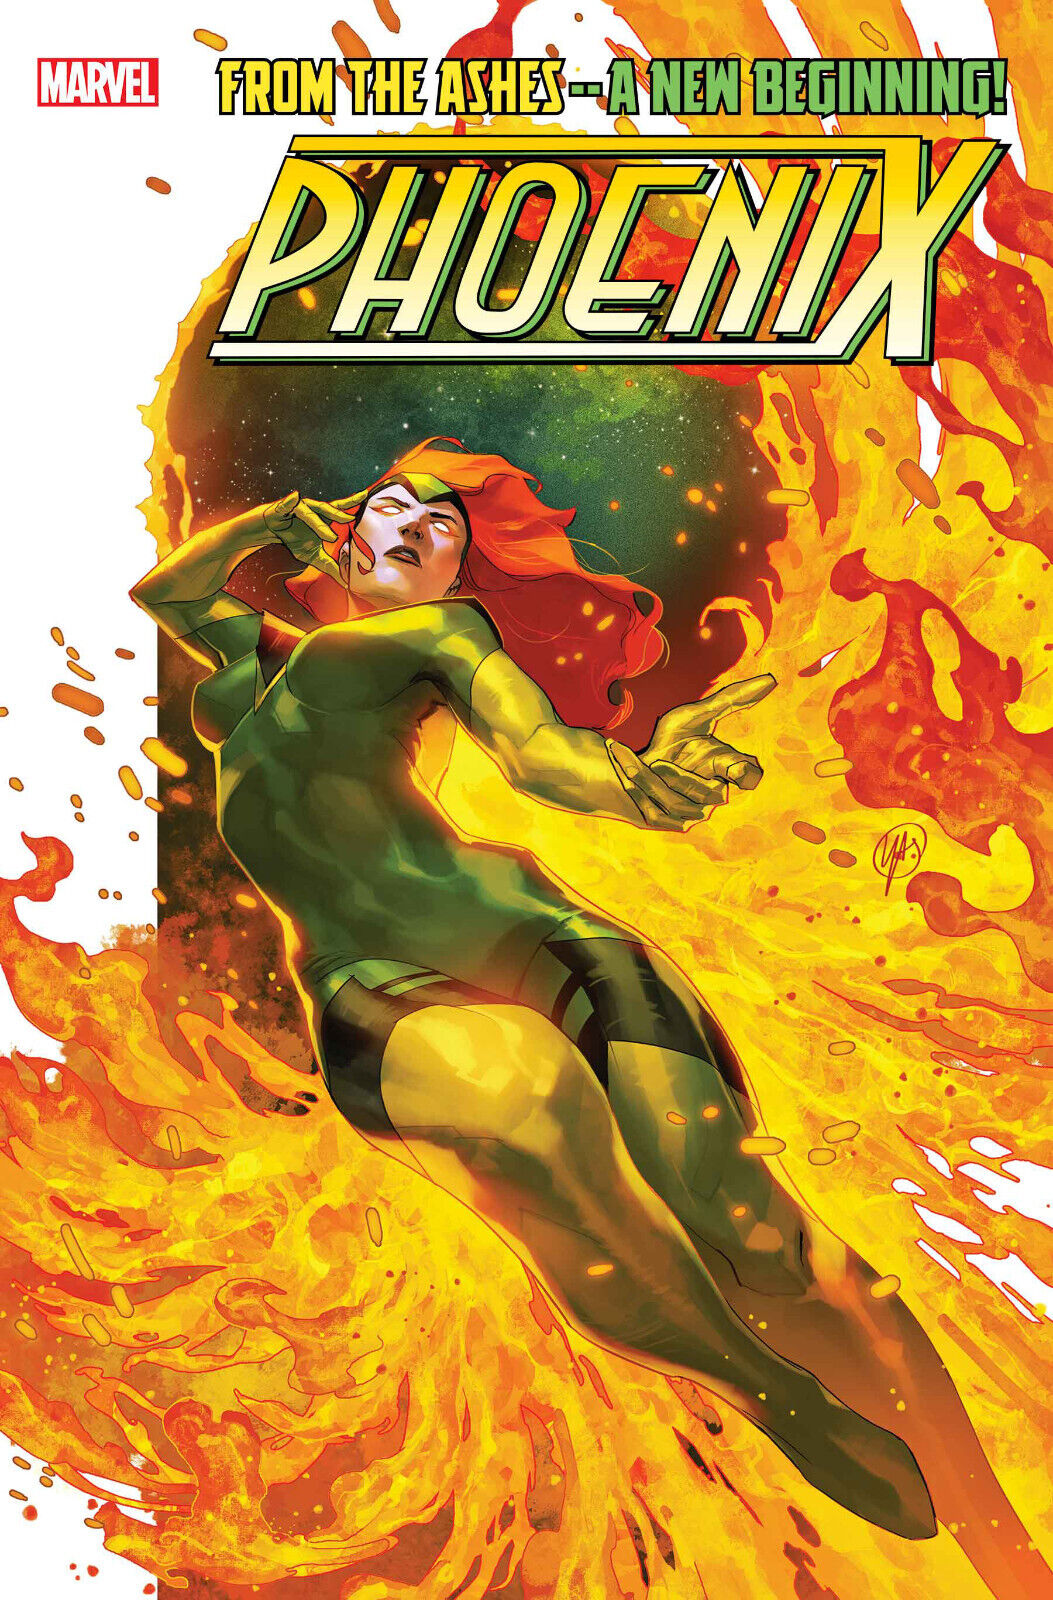 Marvel Comics Phoenix #1 From the Ashes a New Beginning